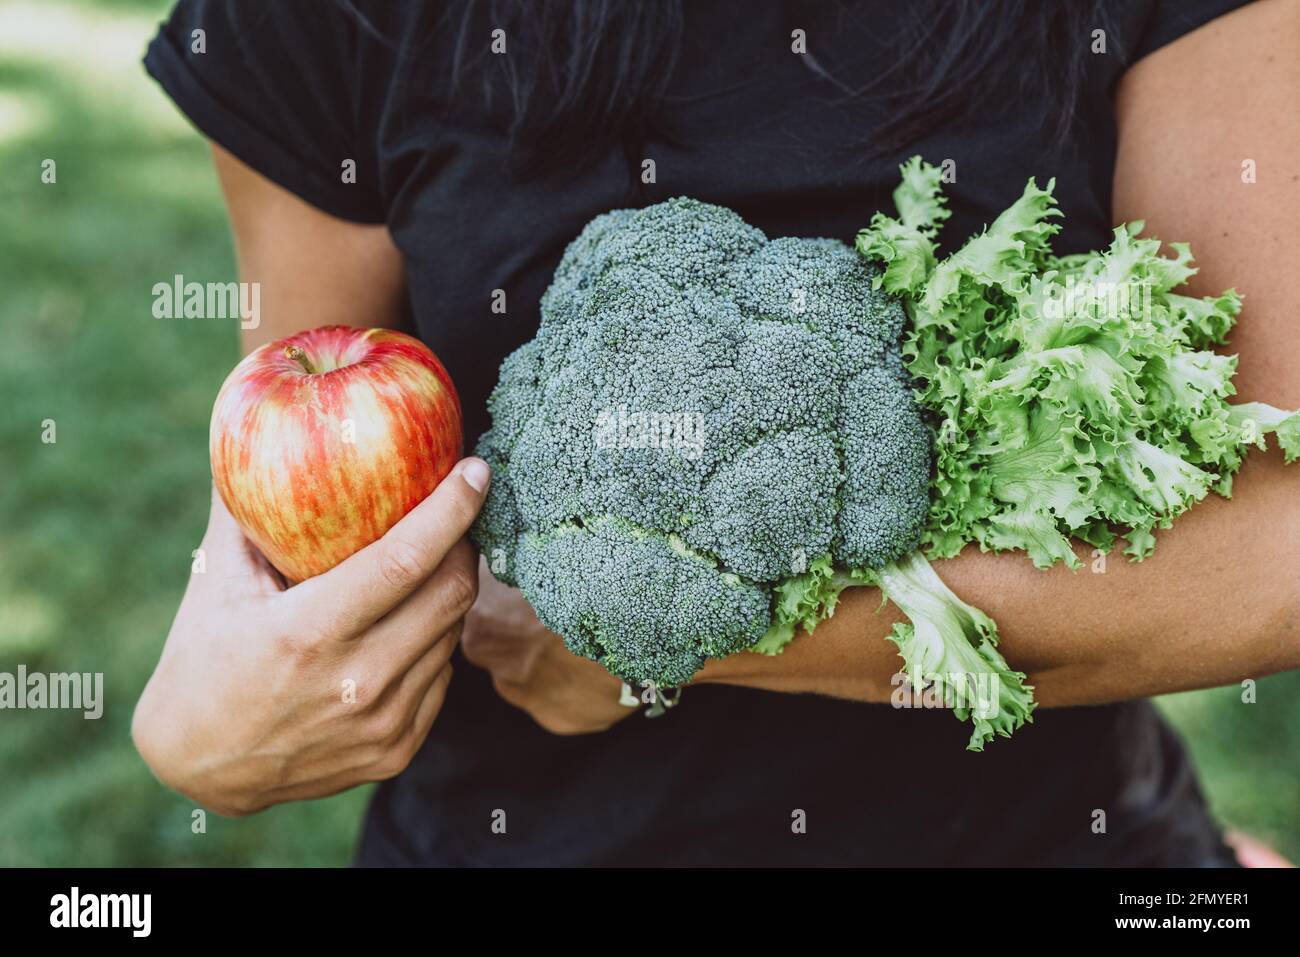 Portrait of tanned woman in the park holding an apple and a bouquet of greens with broccoli, diet, healthy eating. Soft selective focus. Stock Photo